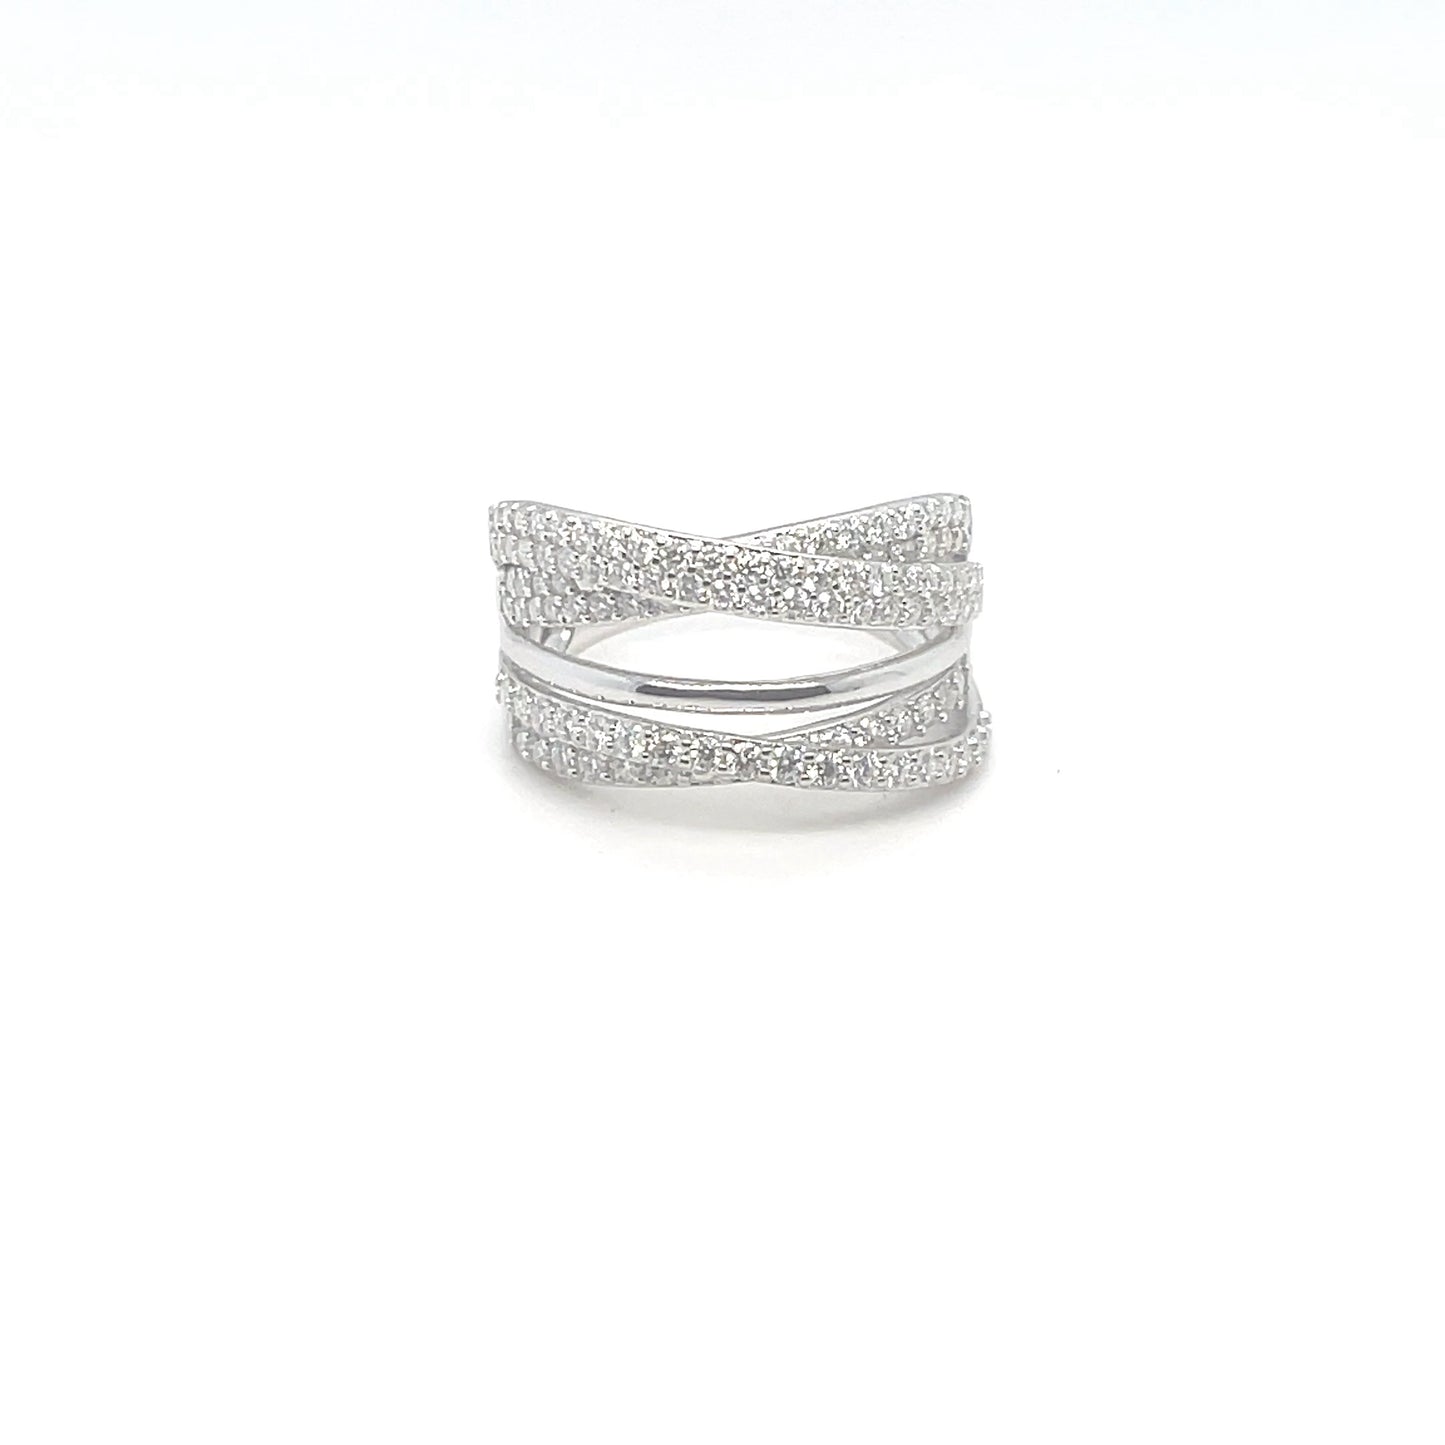 Through Thick & Thin Platinum Plated, Sterling Silver, 5 Band Criss-Cross Ring w/Moissanite Gemstone Highlights.